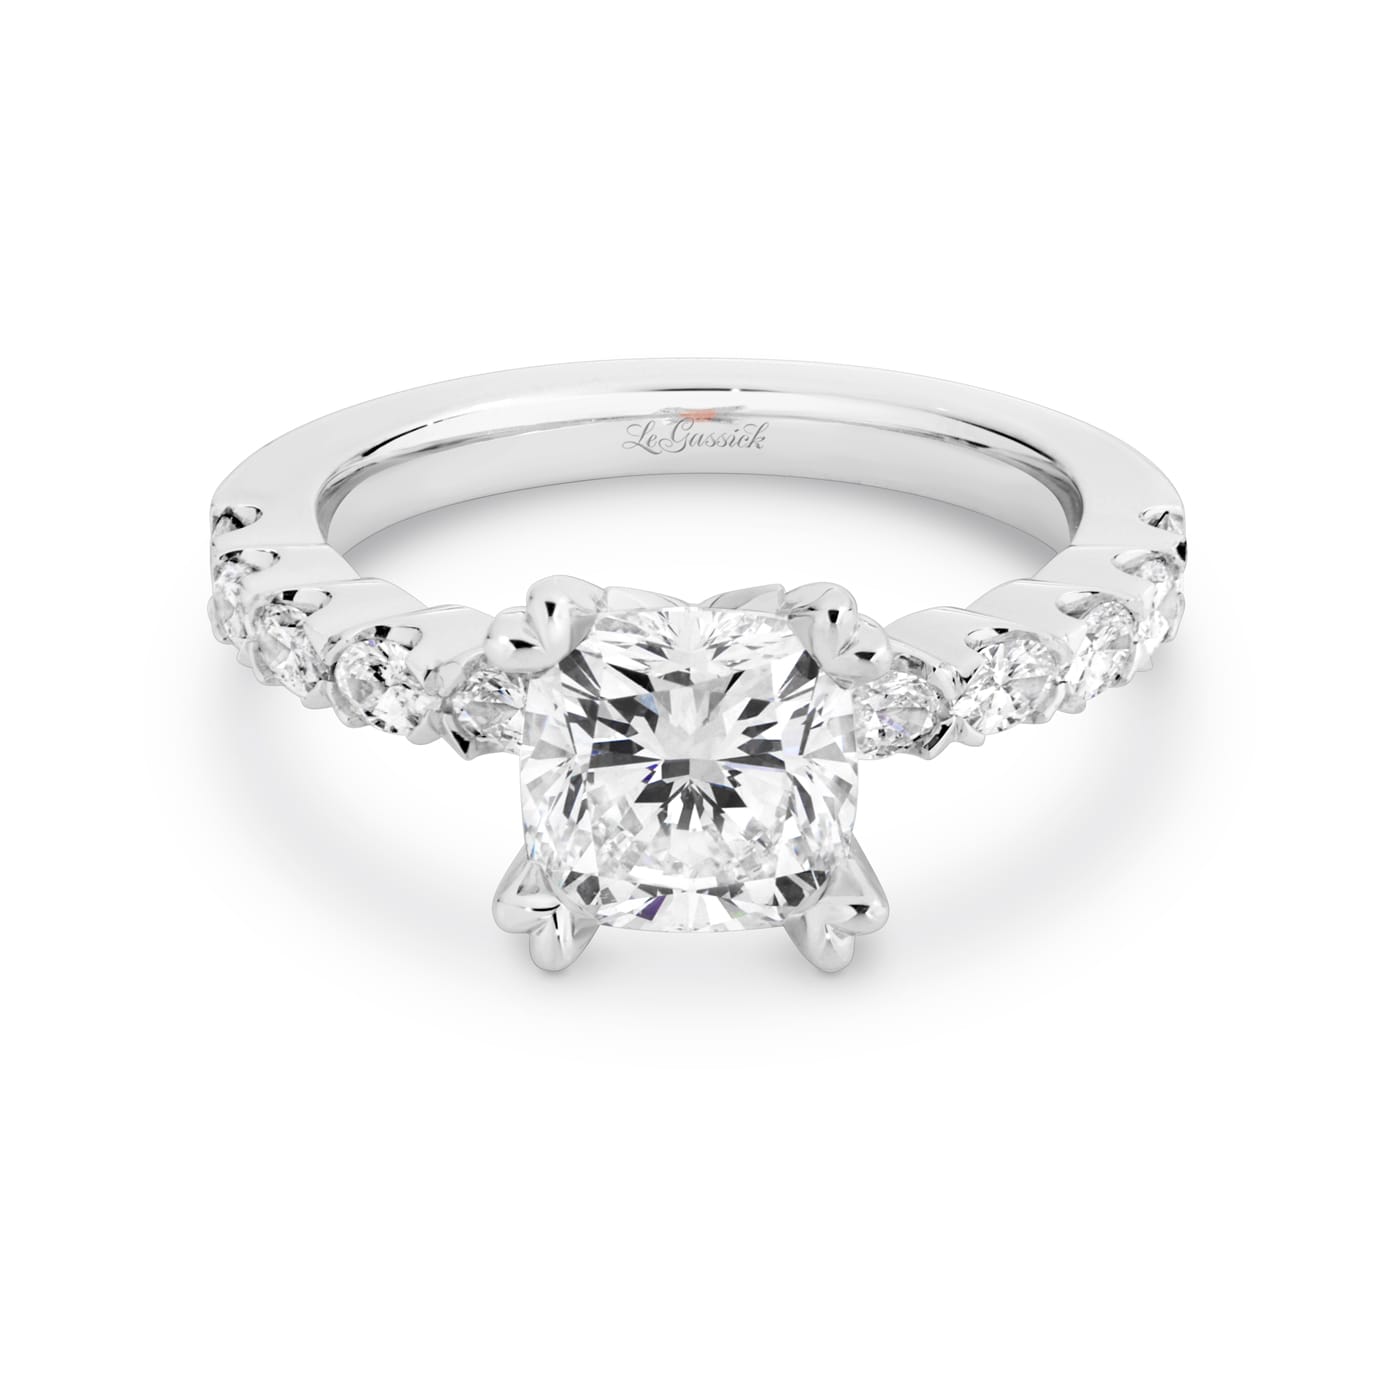 Grace has a 2.04 carat cushion-cut solitaire featuring 10 white oval cut diamonds on the band. Grace also features a natural Argyle pink diamond that has been nestled under her setting. She was designed and handcrafted by LeGassick's Master Jewellers, Gold Coast, Australia.